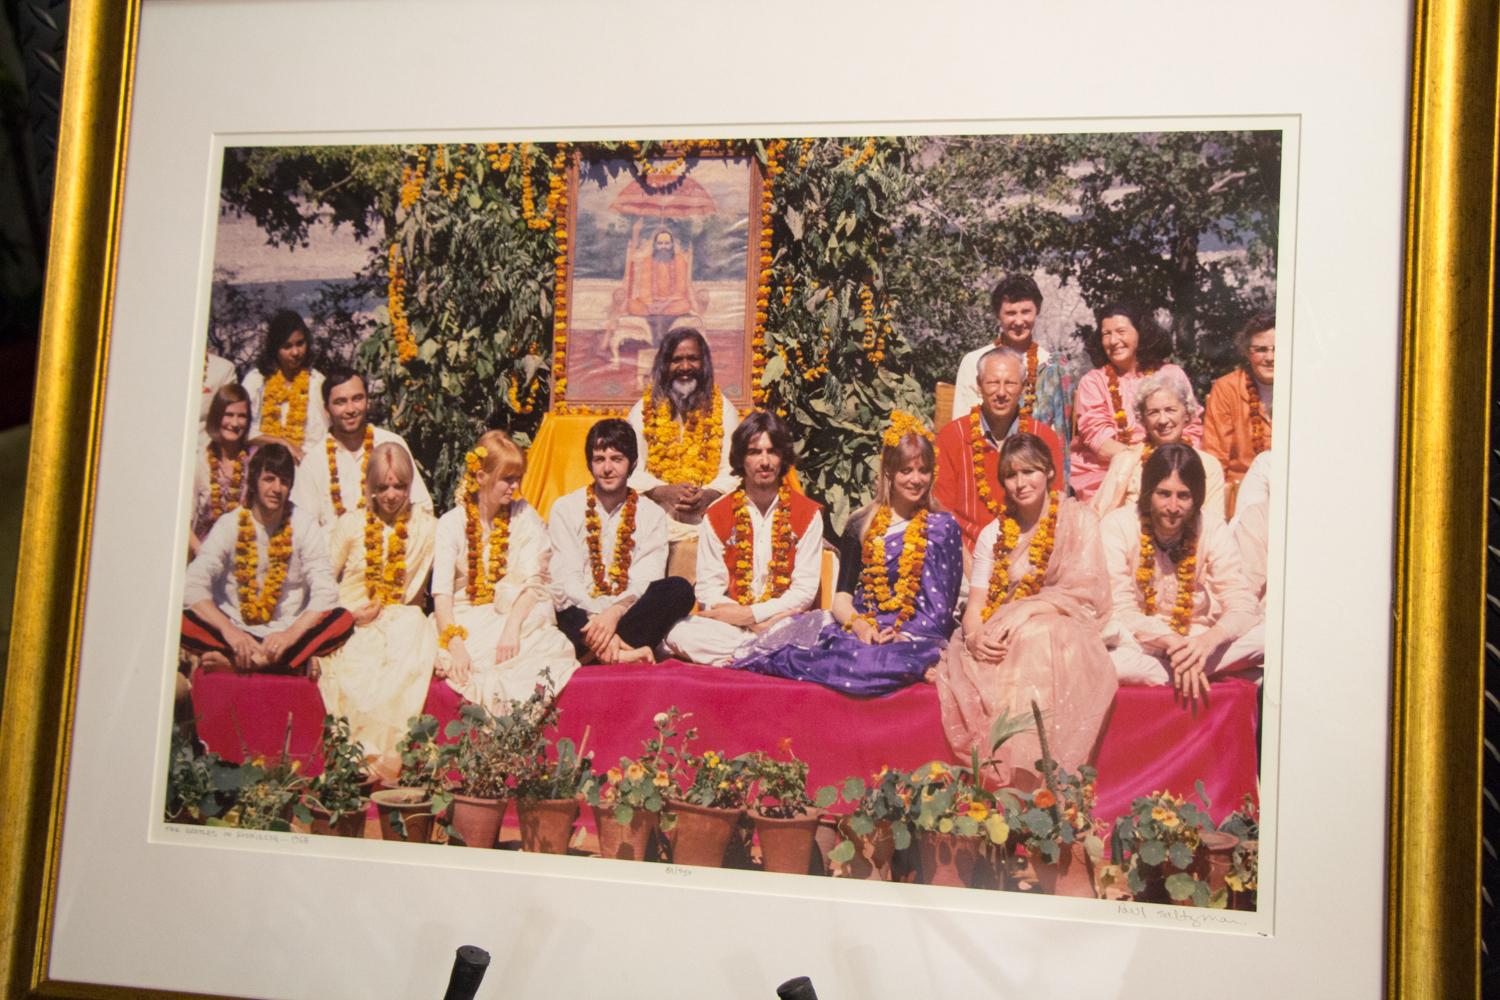 The Beatles in India Photograph by Paul Saltzman - Archival Color Fine Art Print For Sale 1